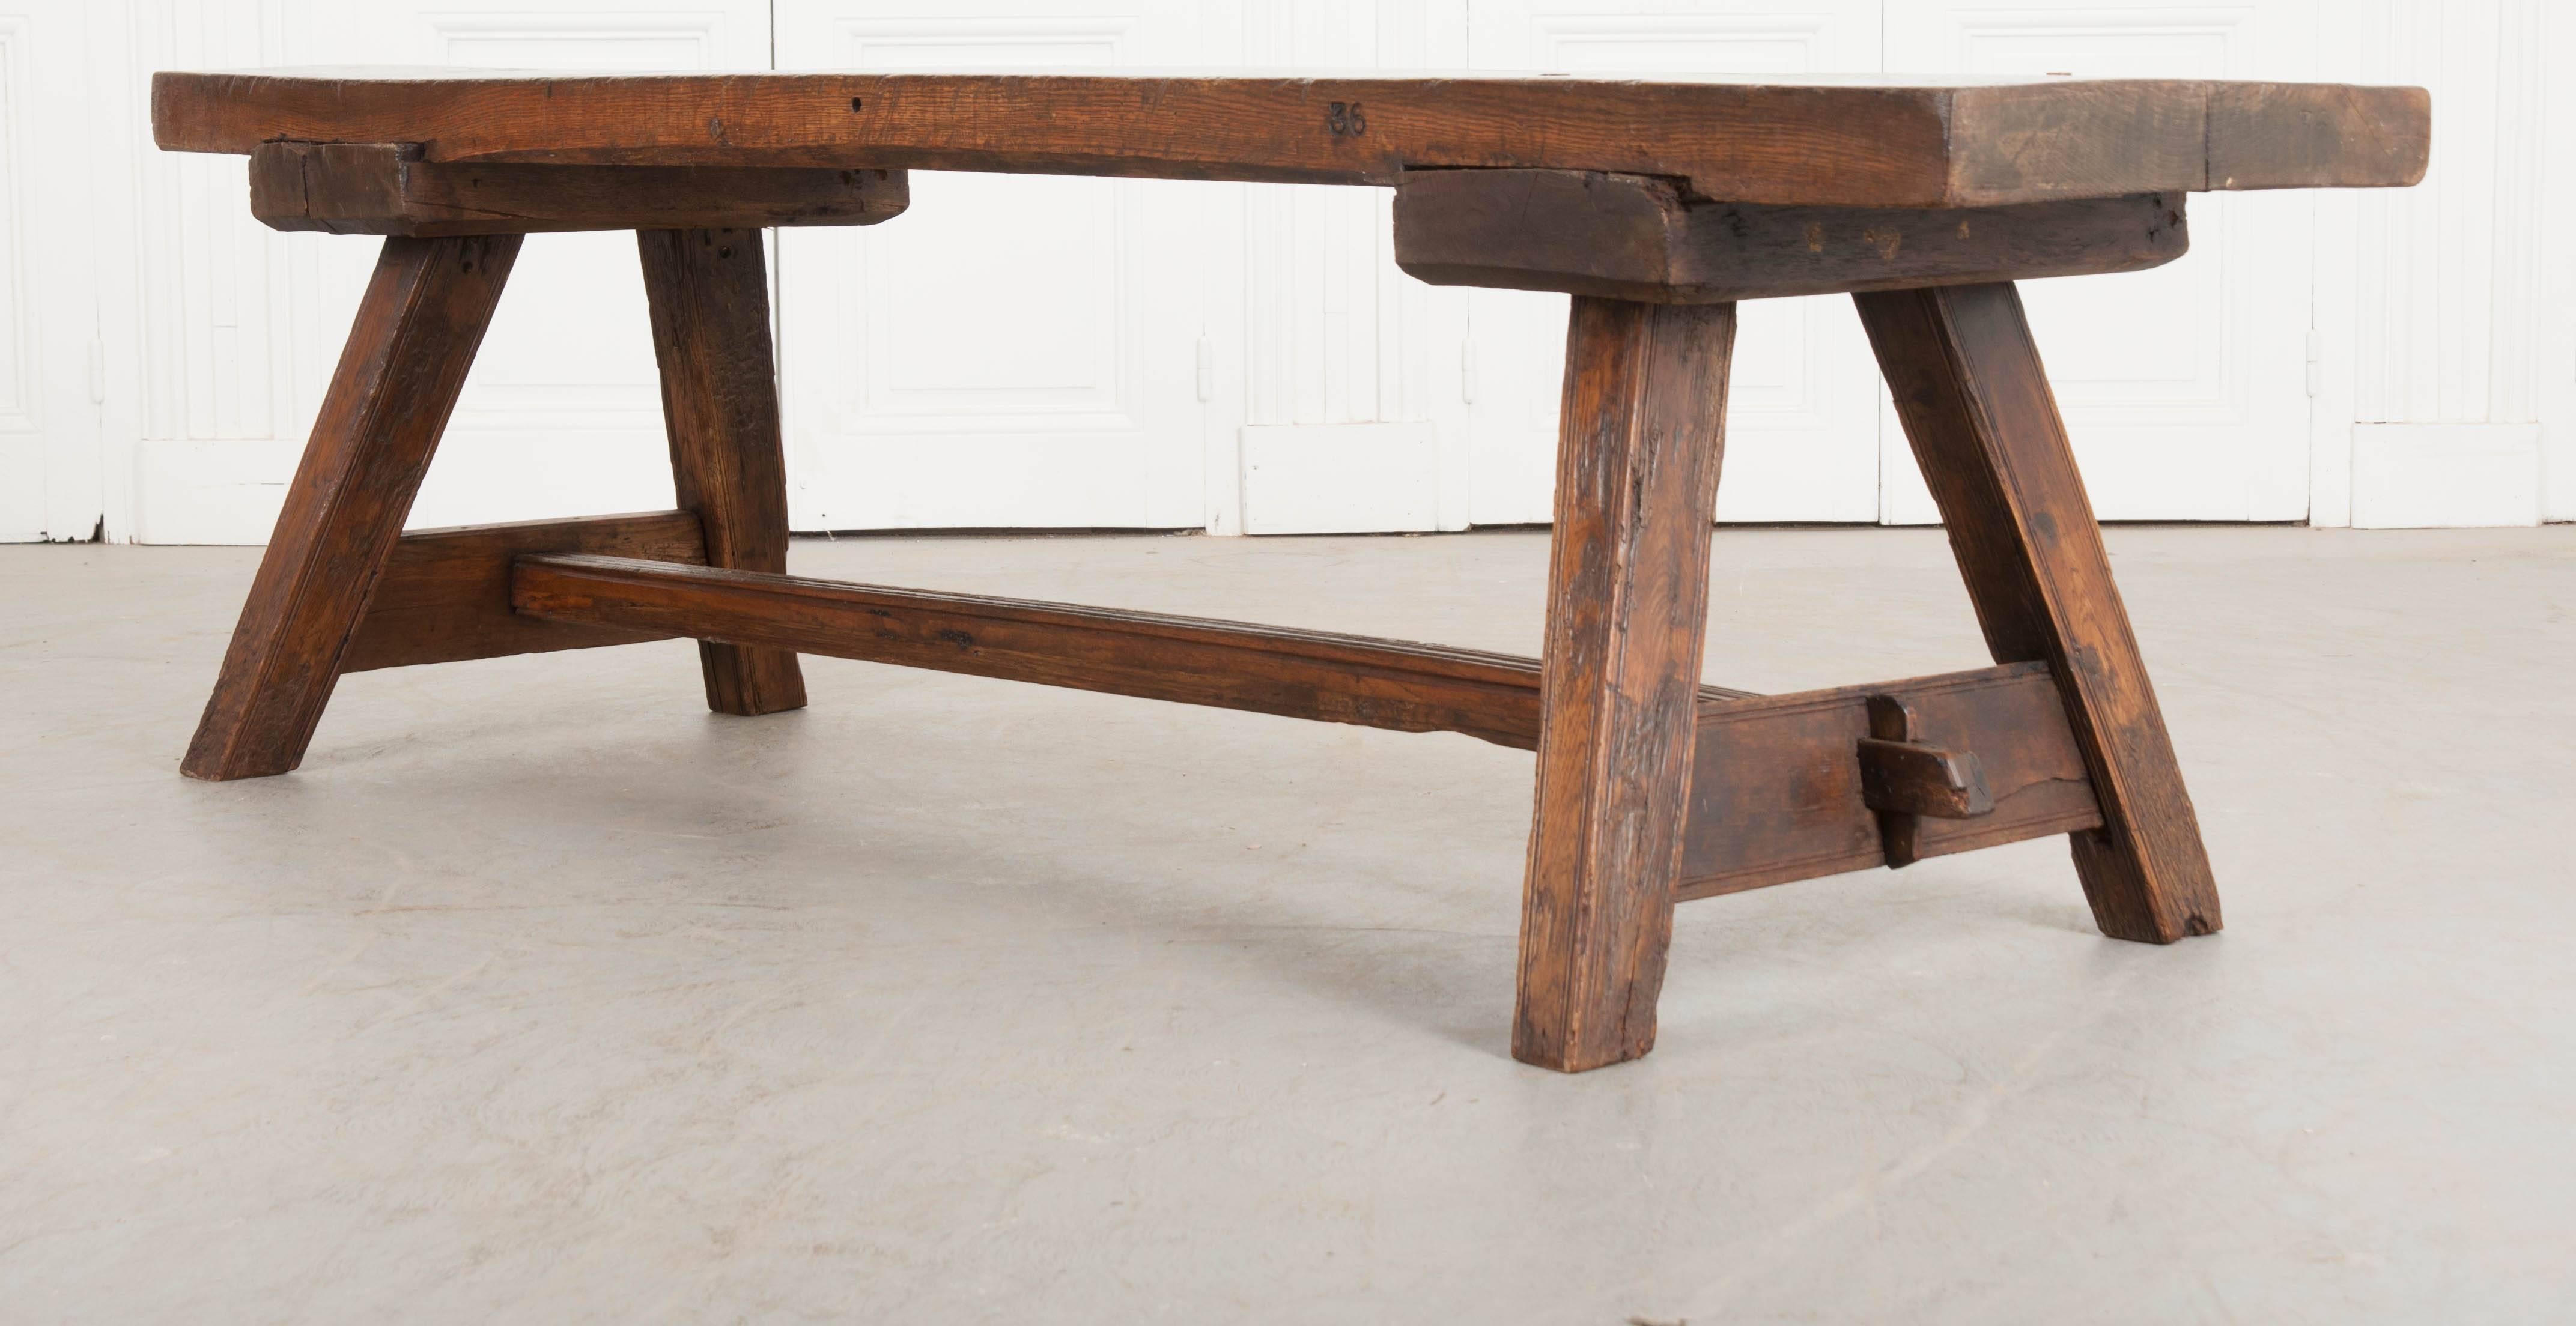 A single solid-oak board was used to make the top of this incredible 19th century English bench. The bench was made in the English countryside, circa 1830. The top is worn, with evidence of countless bottoms resting momentarily before going their